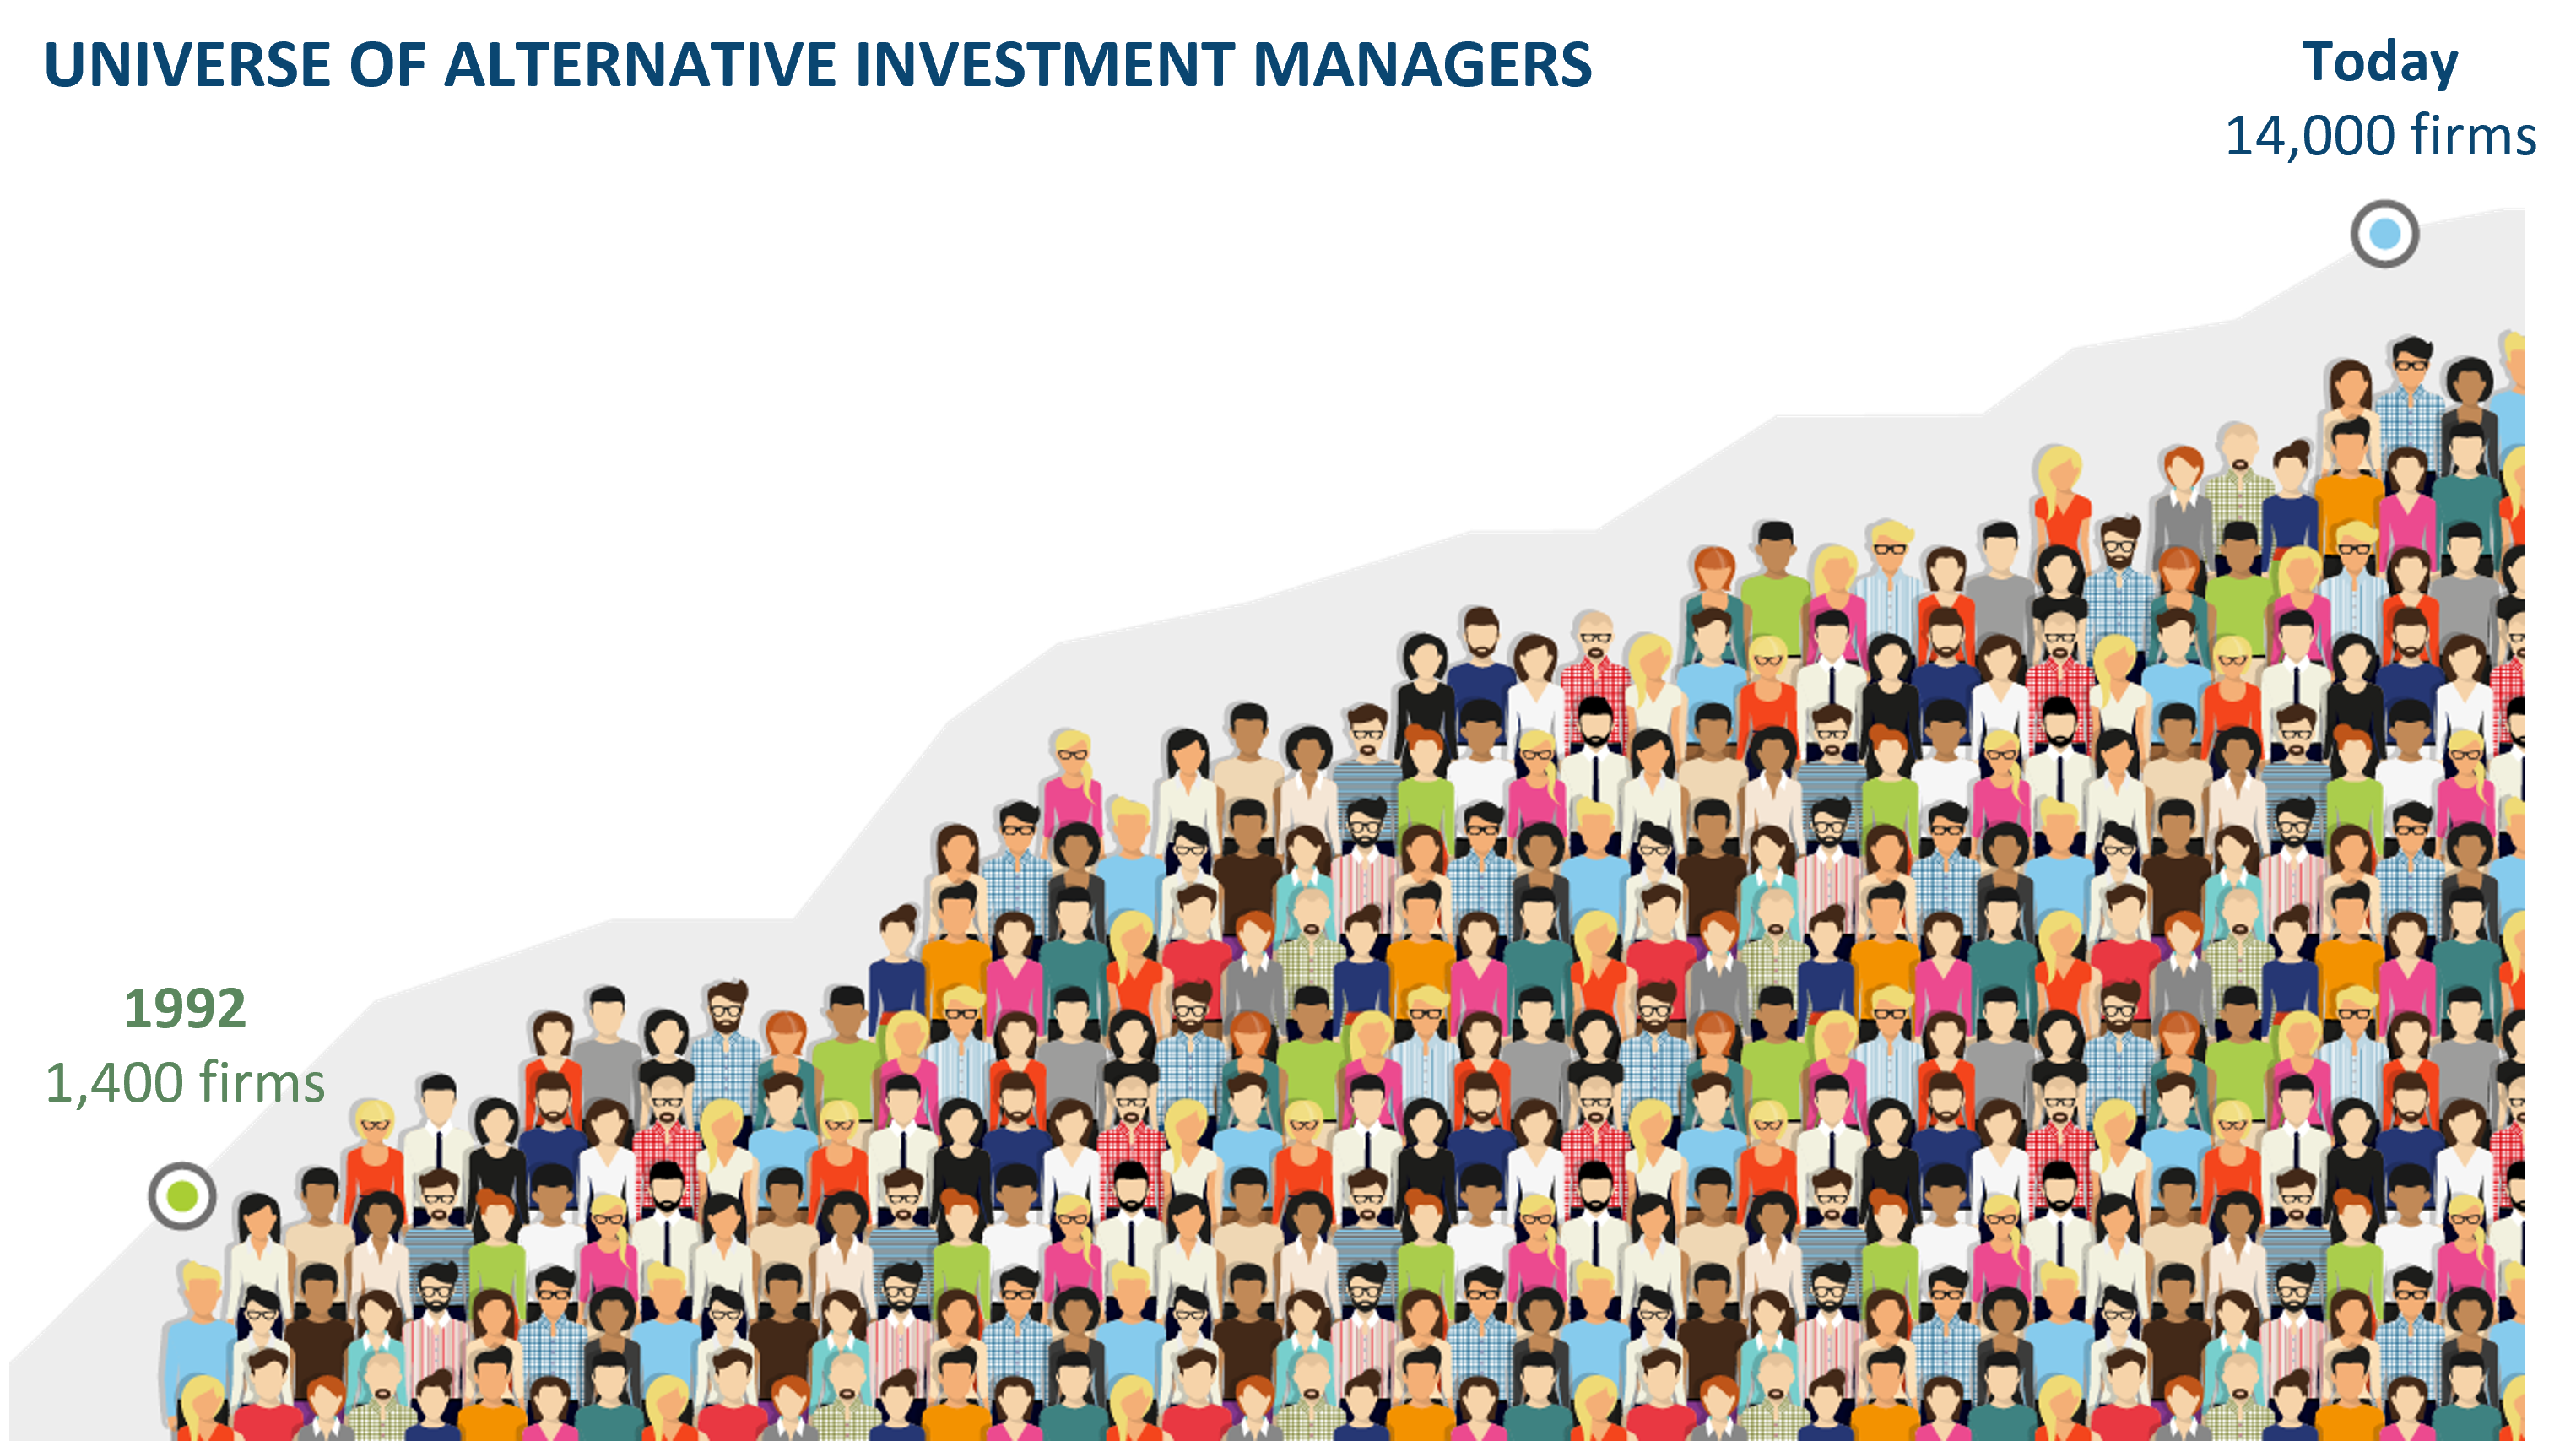 Universe of Alternative Investment Managers